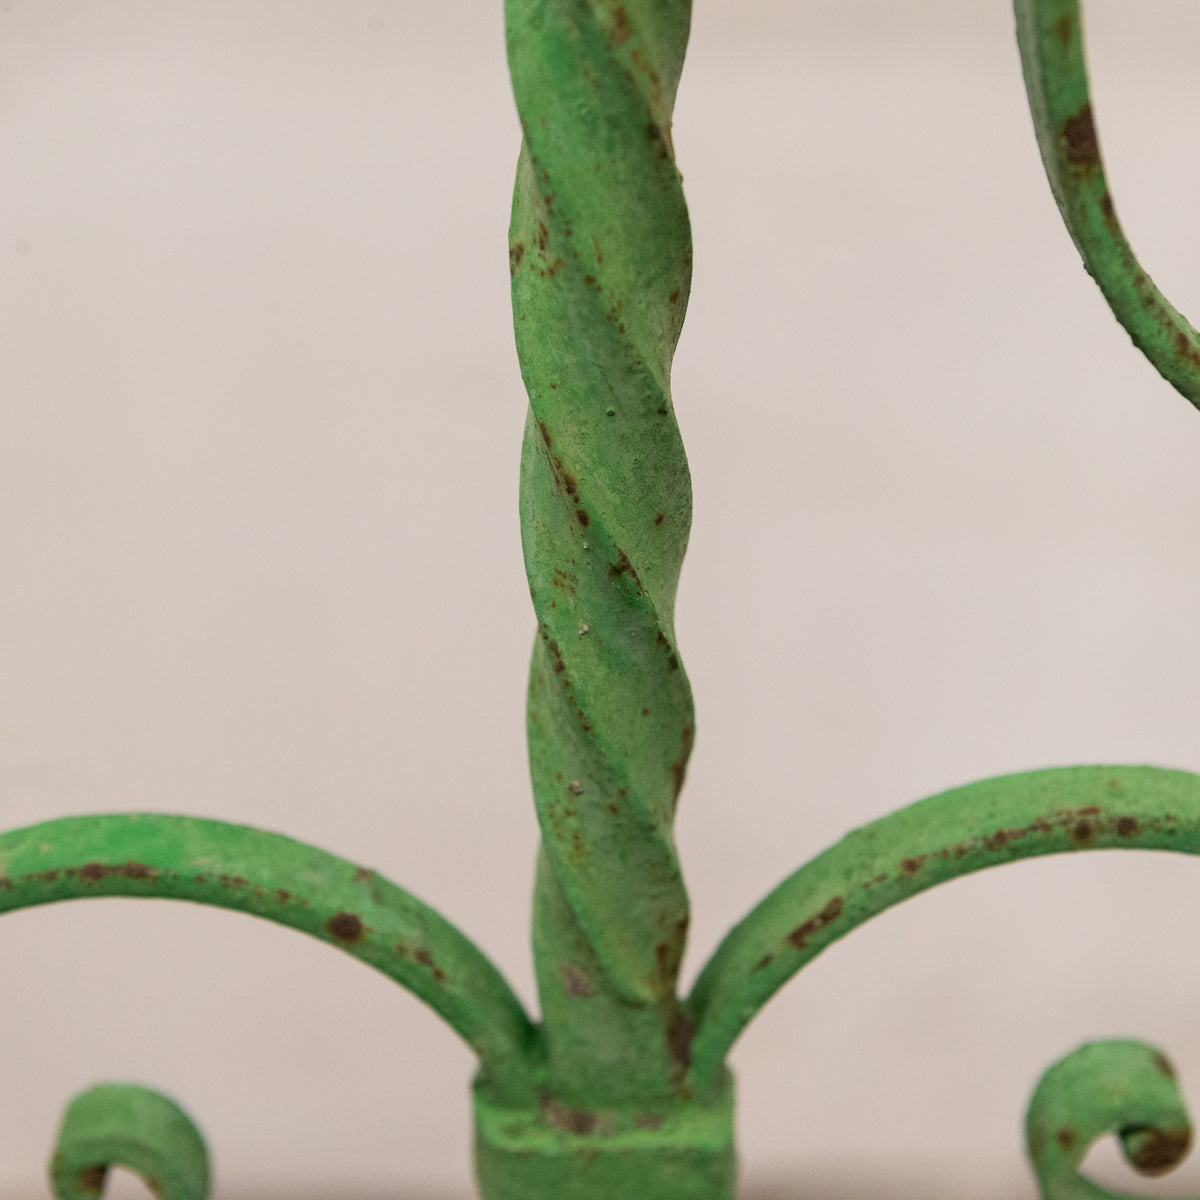 Pair of Ornate Antique Wrought Iron Spanish Window Guard  / Grills | The Architectural Forum